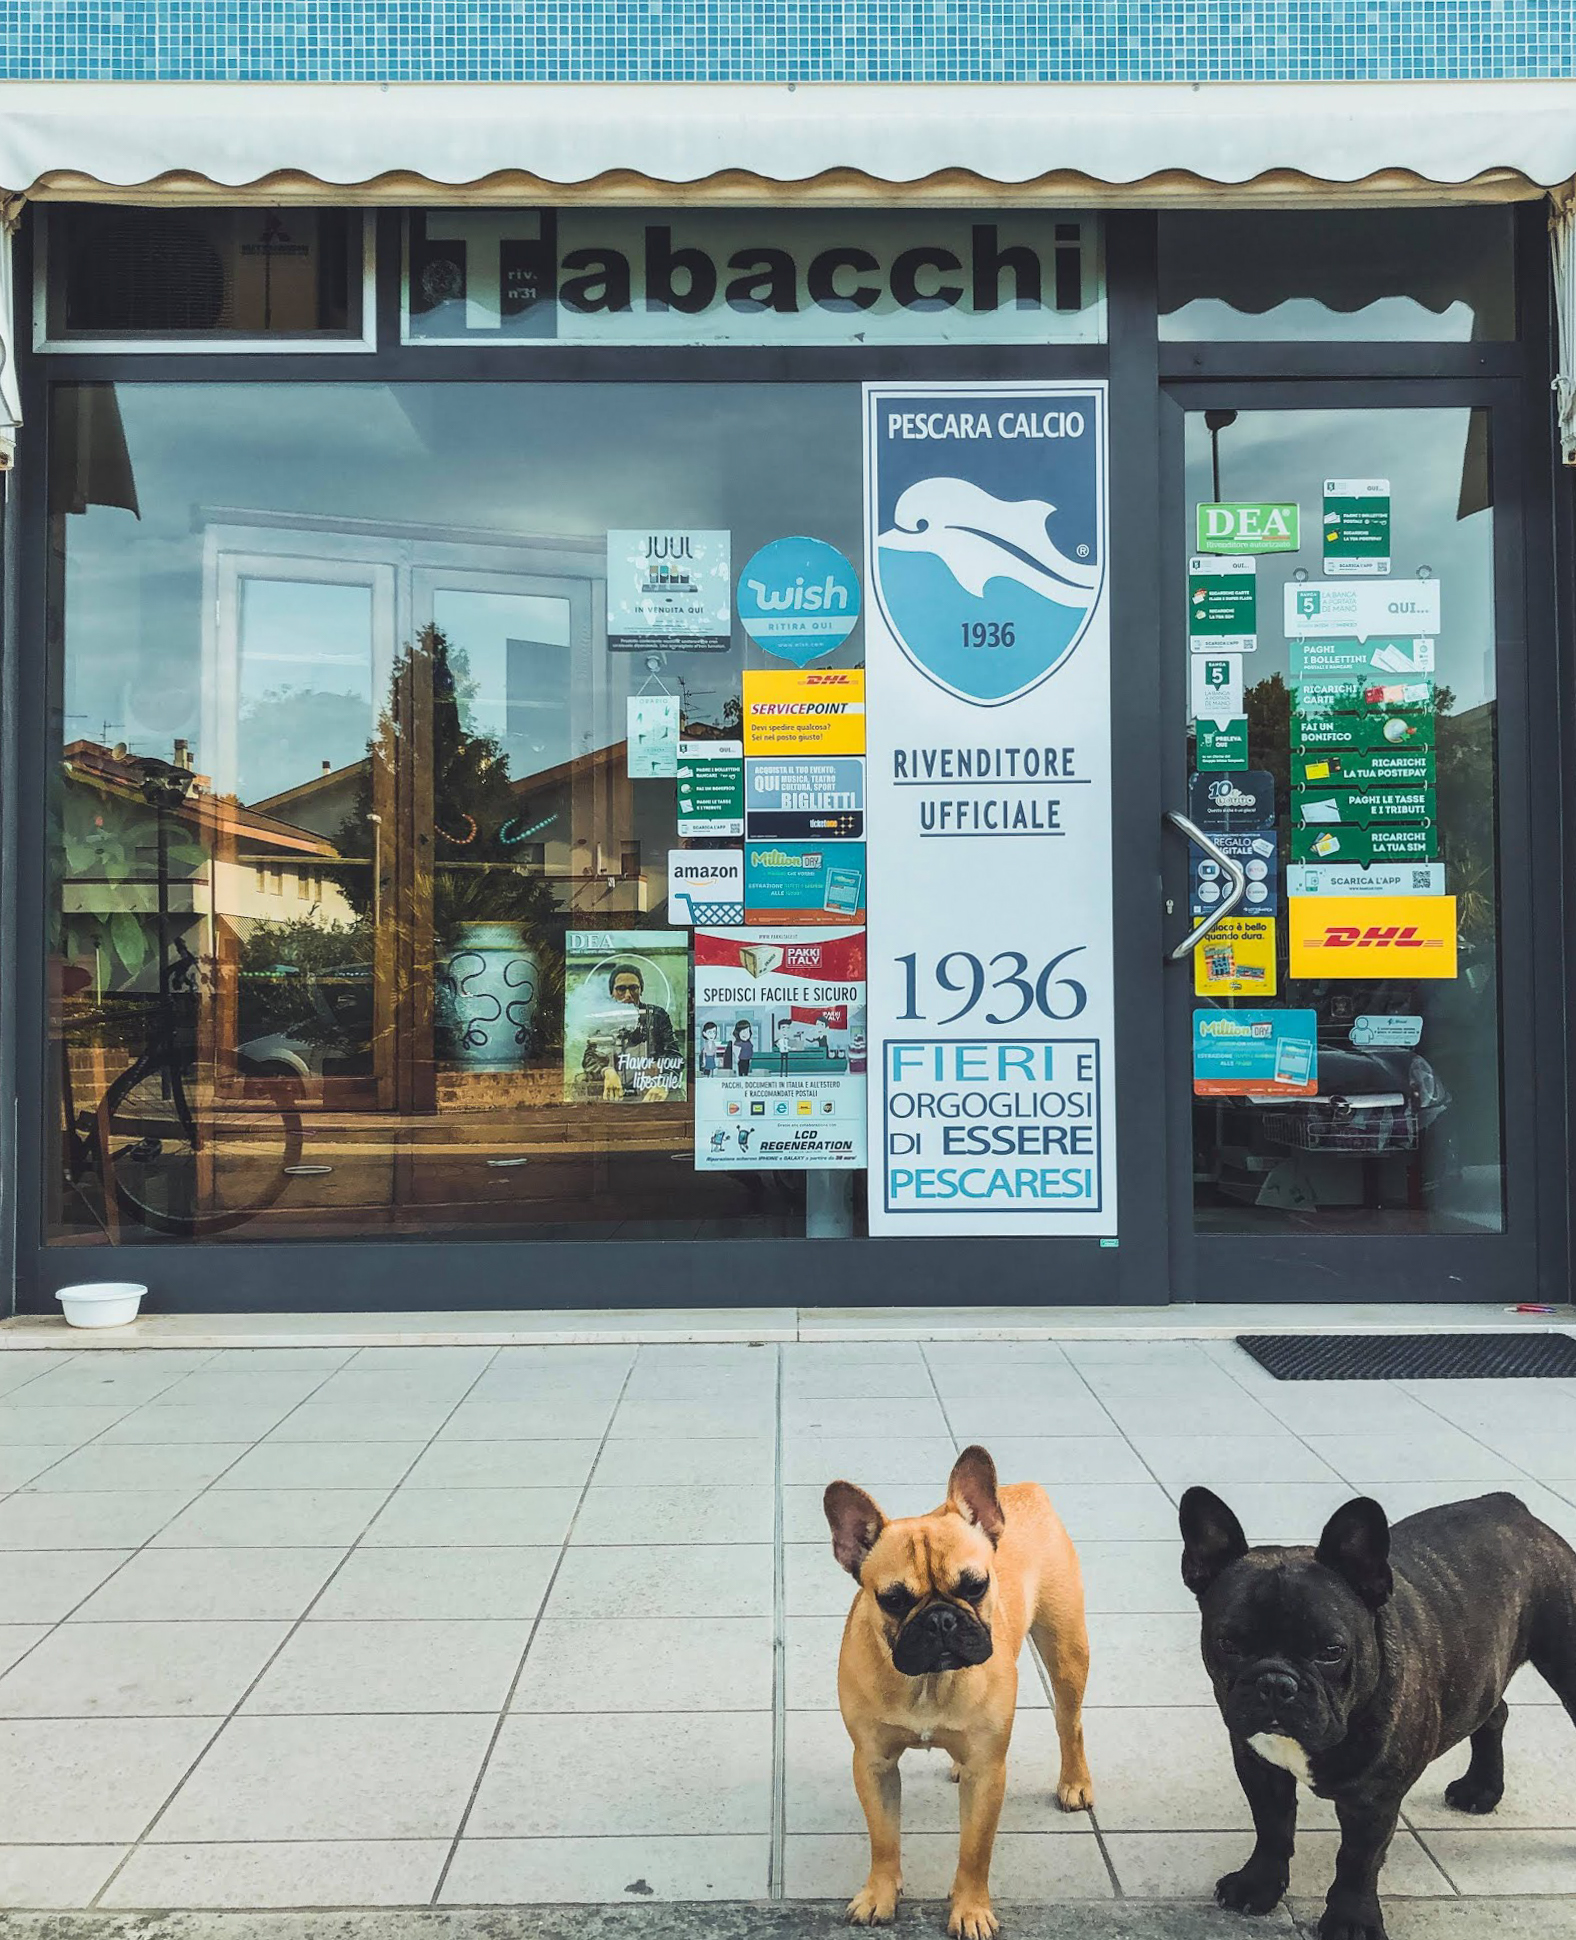 How an Italian Tobacco Shop Owner Connected with His Community